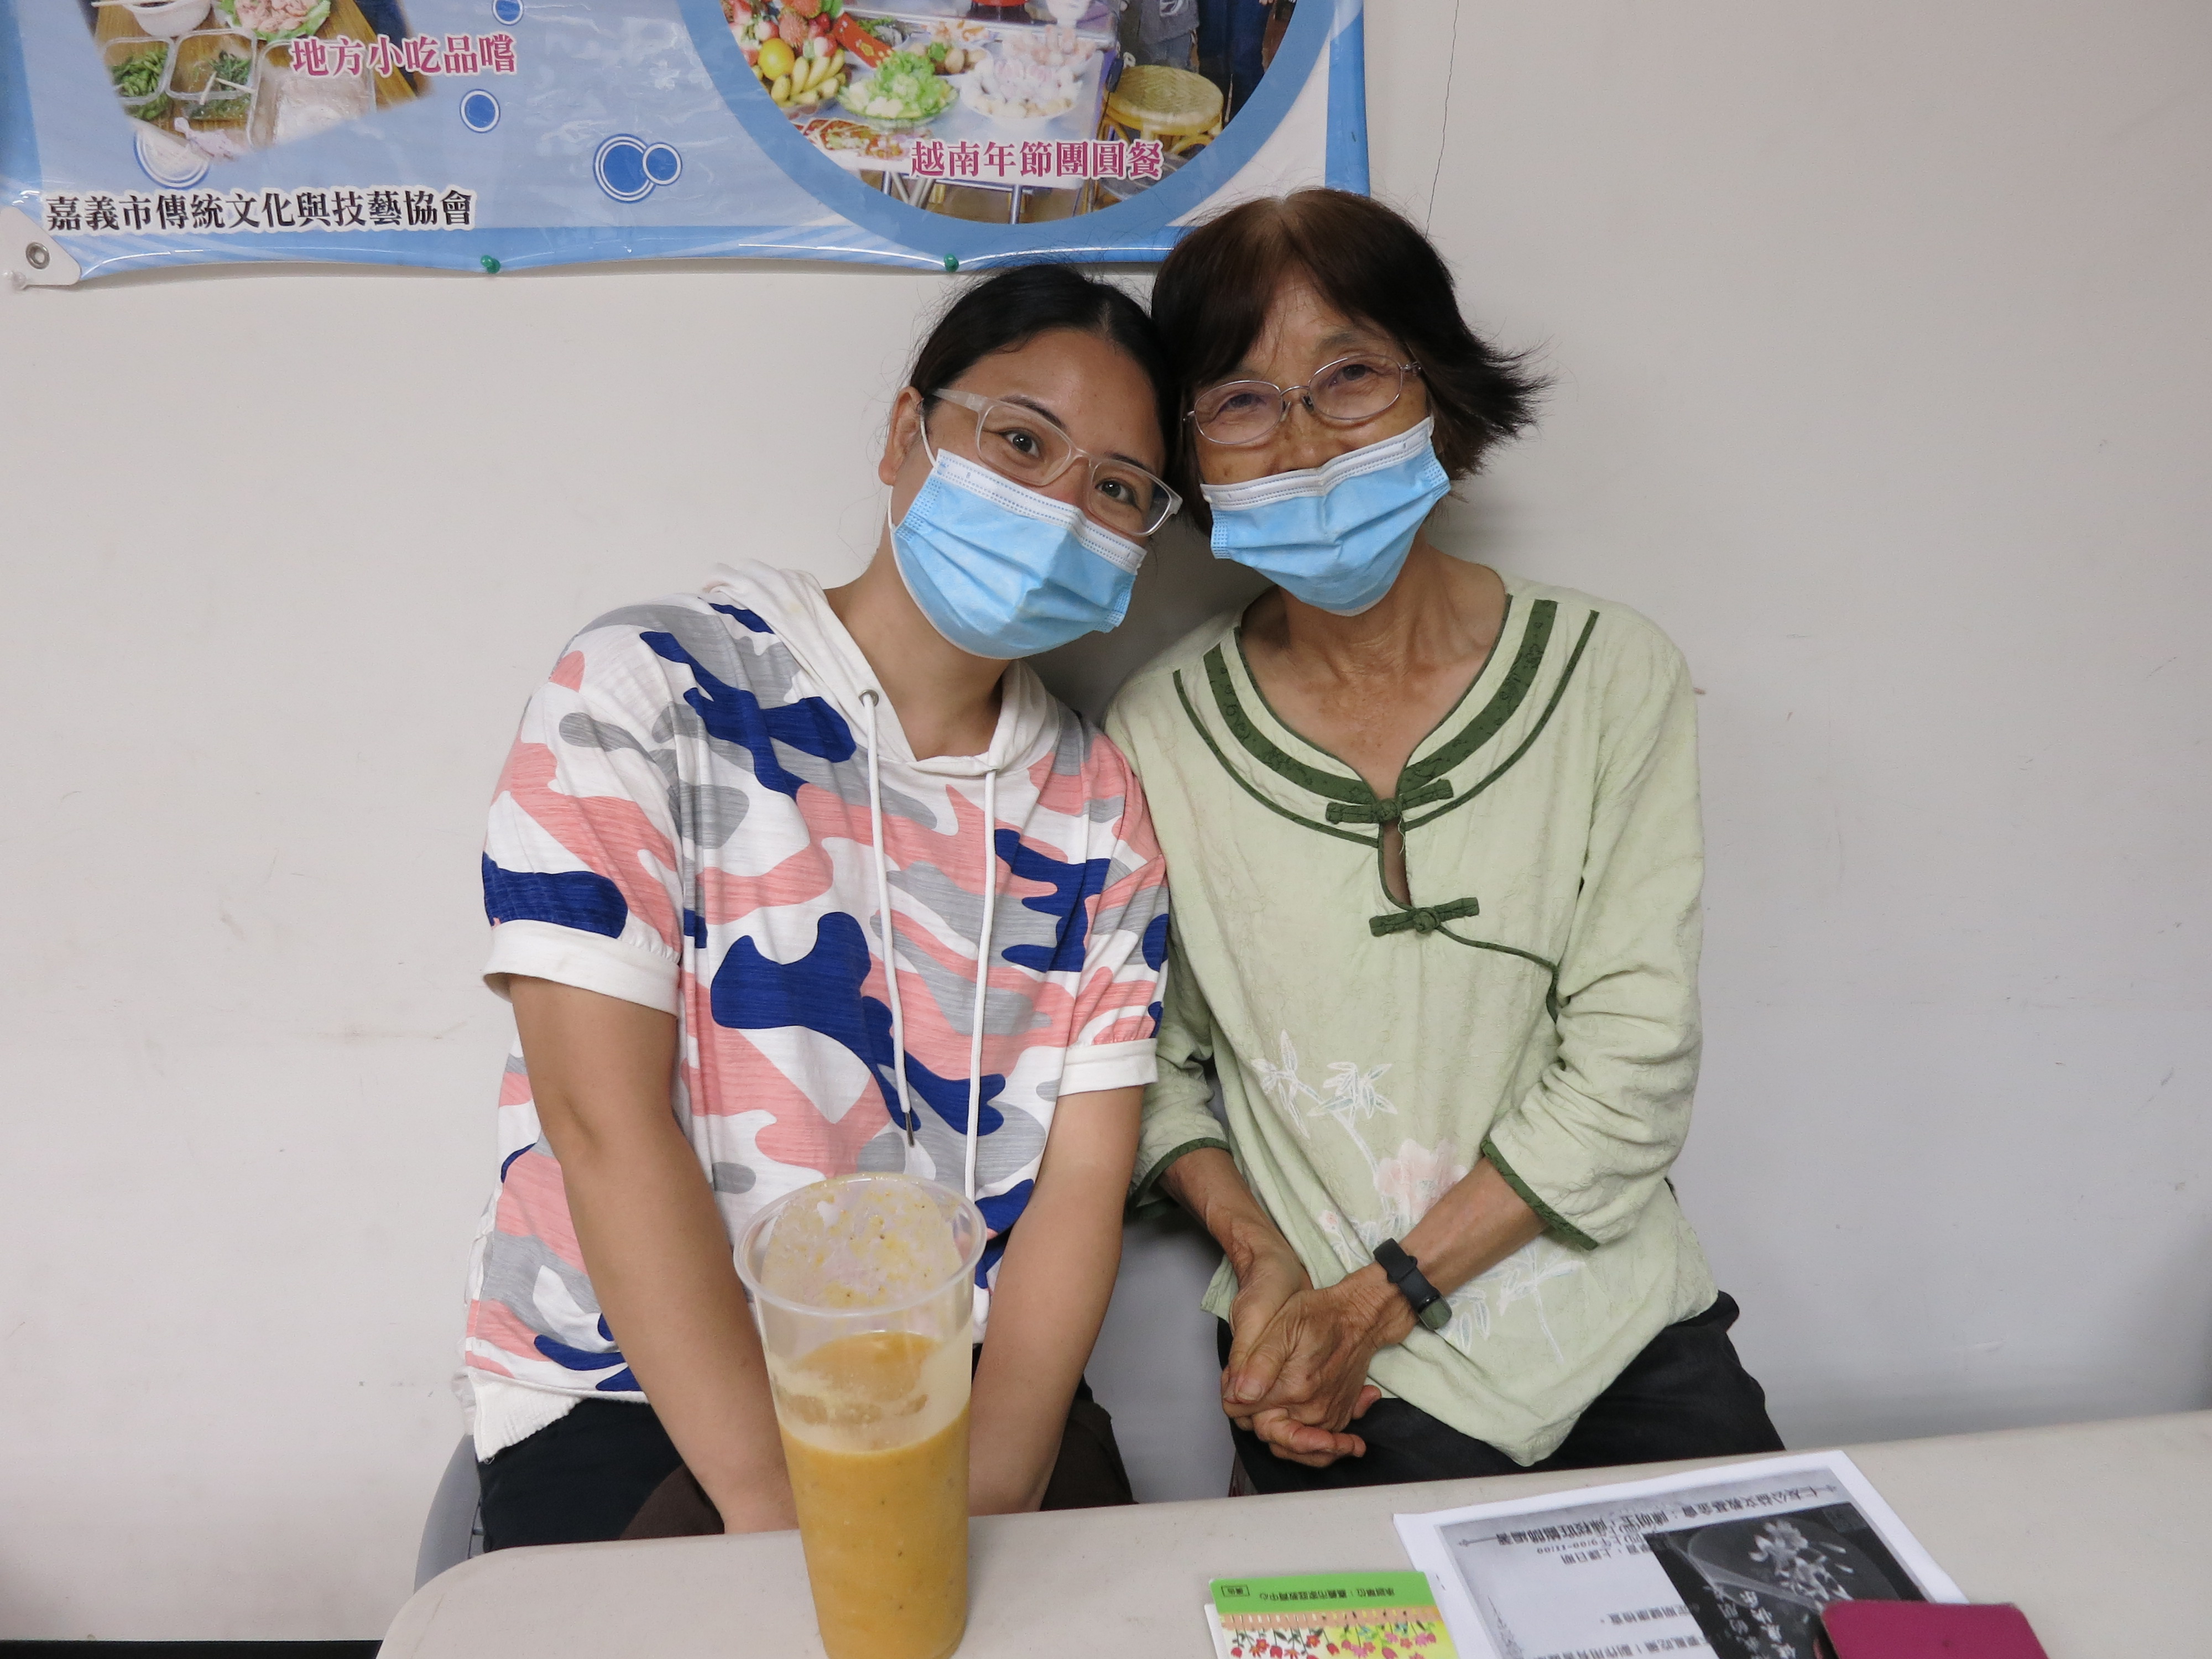 Chiayi resident, Ms. Li from mainland China (left), was taken by her mother-in-law (right) to participate in a family education course organized by the National Immigration Agency to make her more familiar with laws and regulations. (Photo/Provided by Chiayi City Service Station)